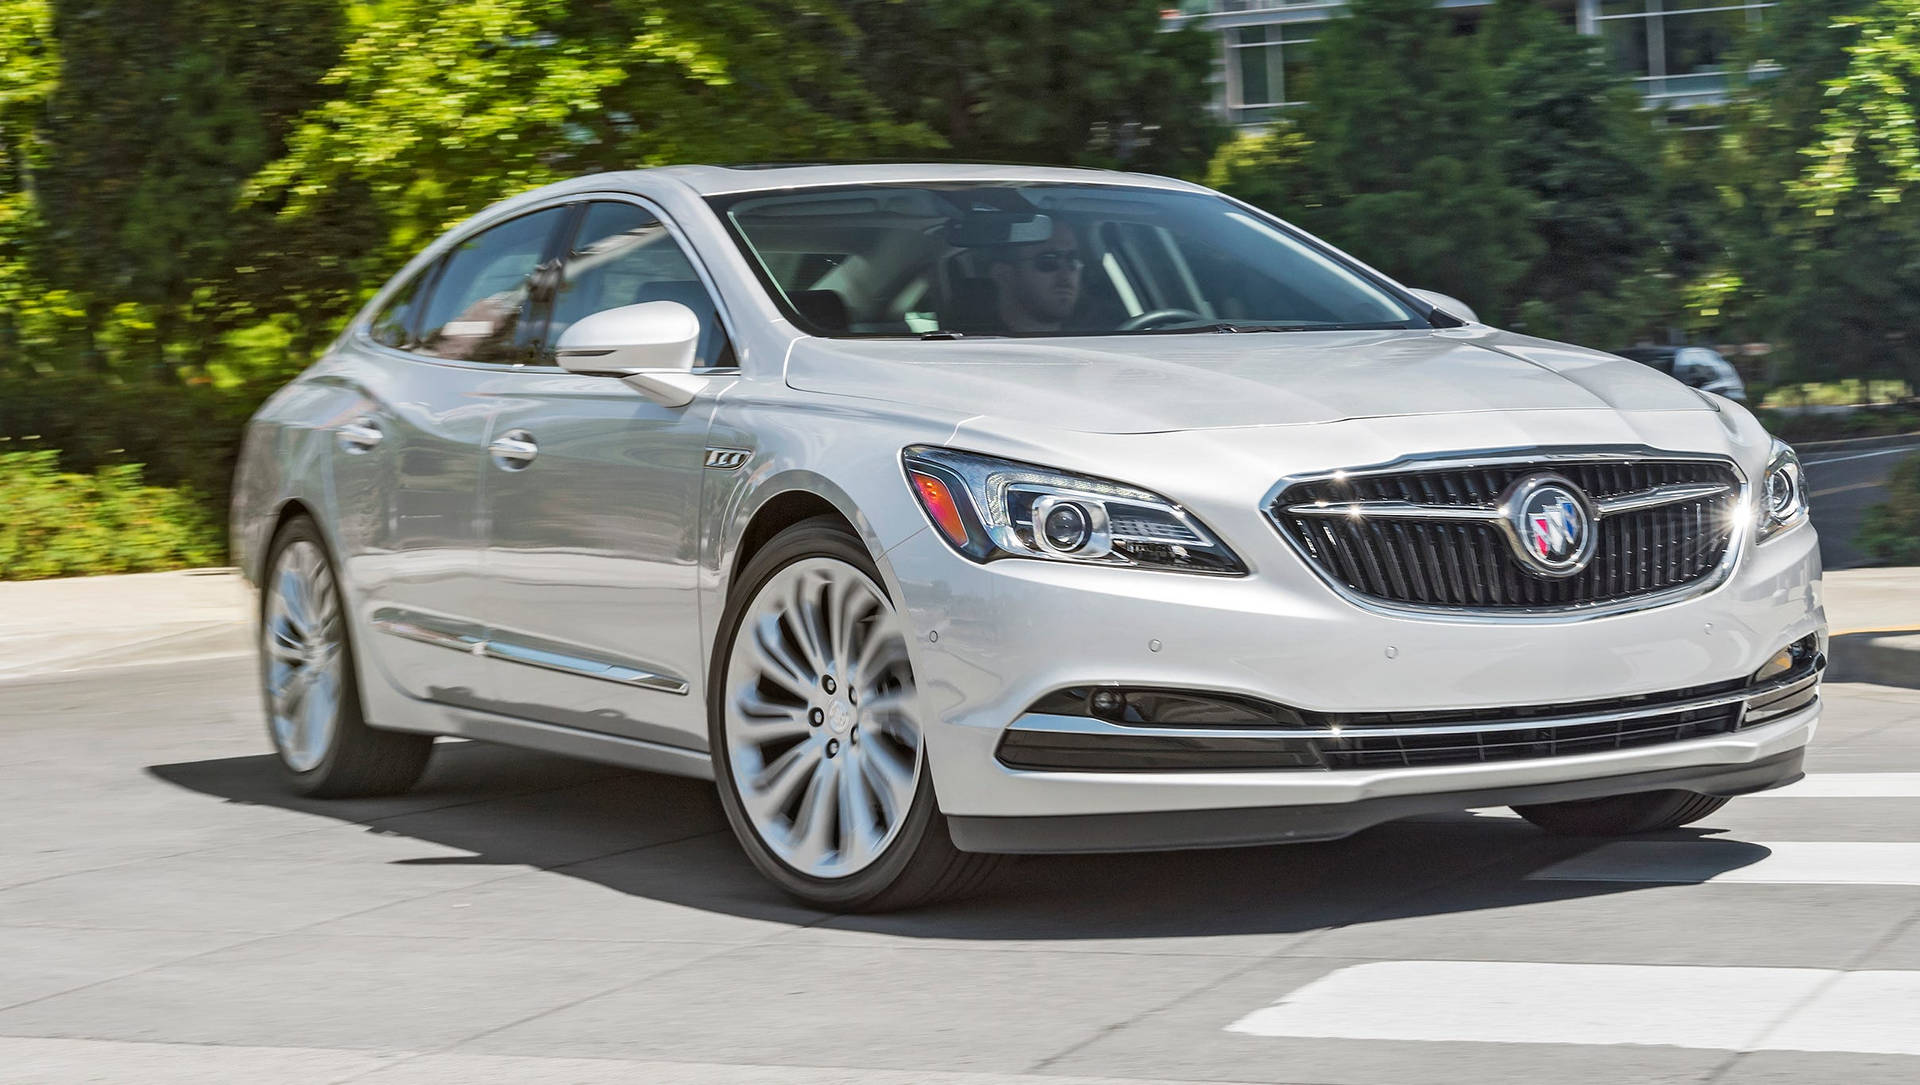 Pearl White Buick Lacrosse Background